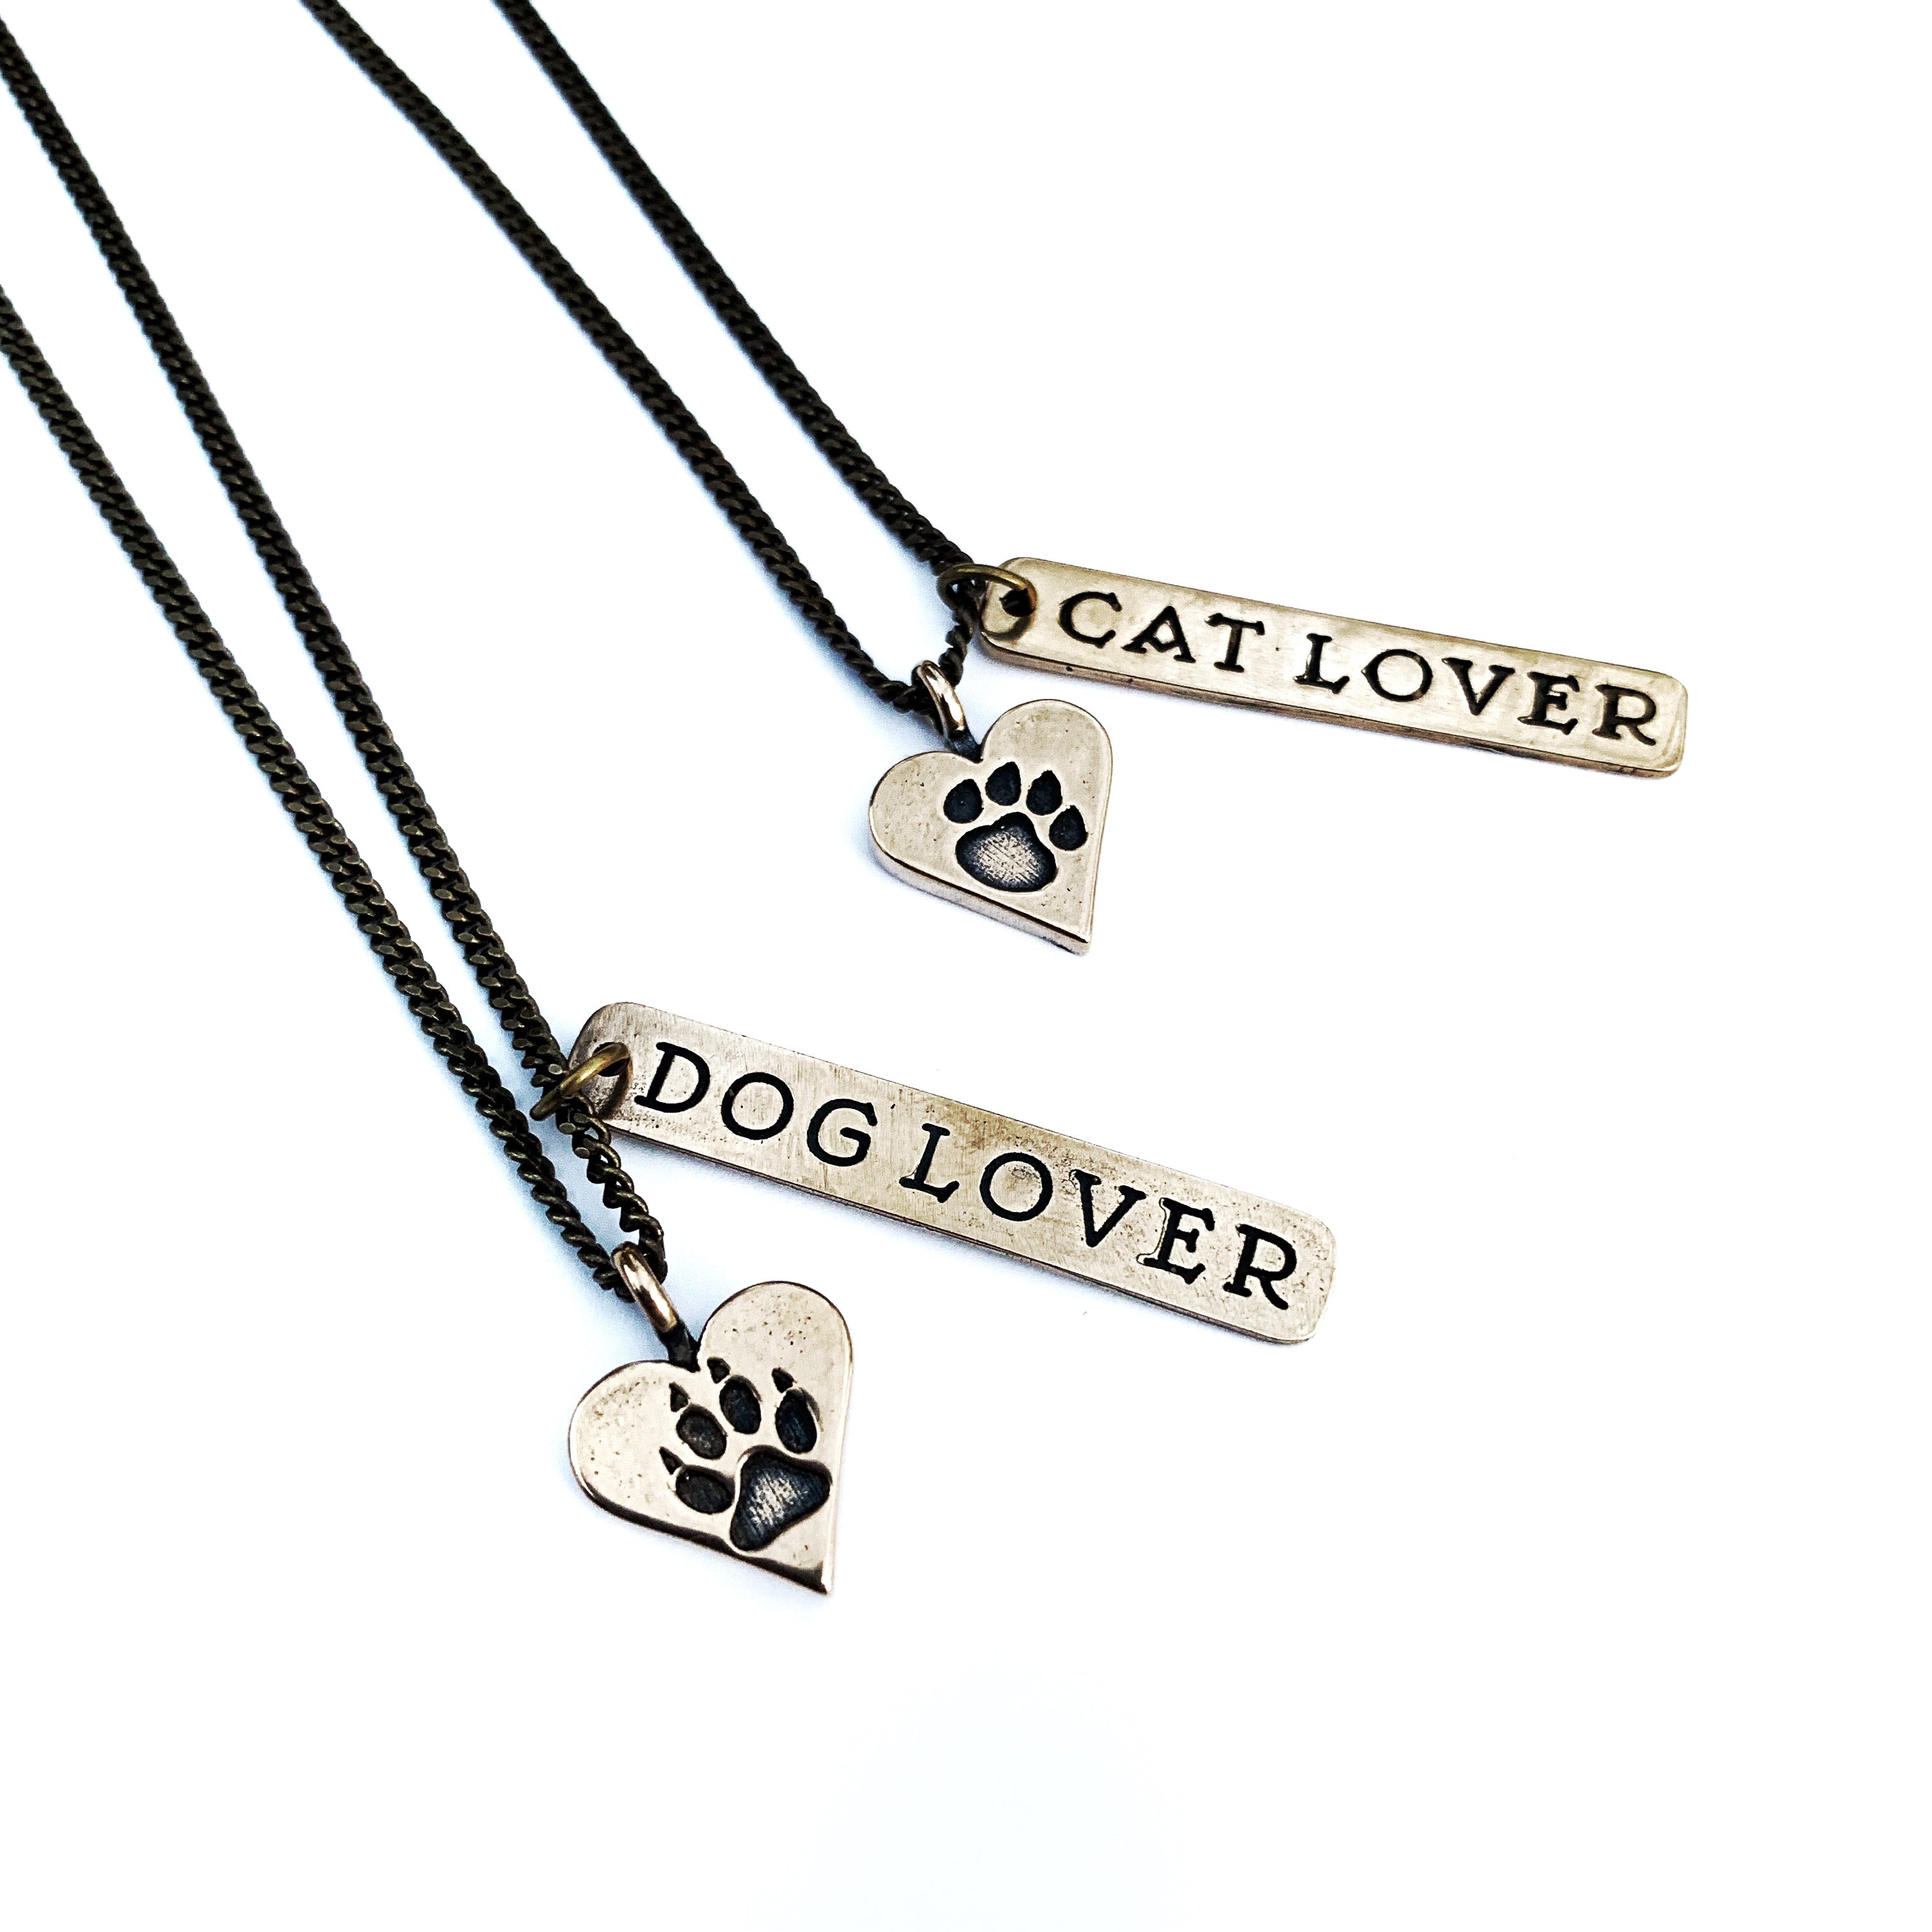 Dog Lover or Cat Lover Necklace - Bronze Choker Mini